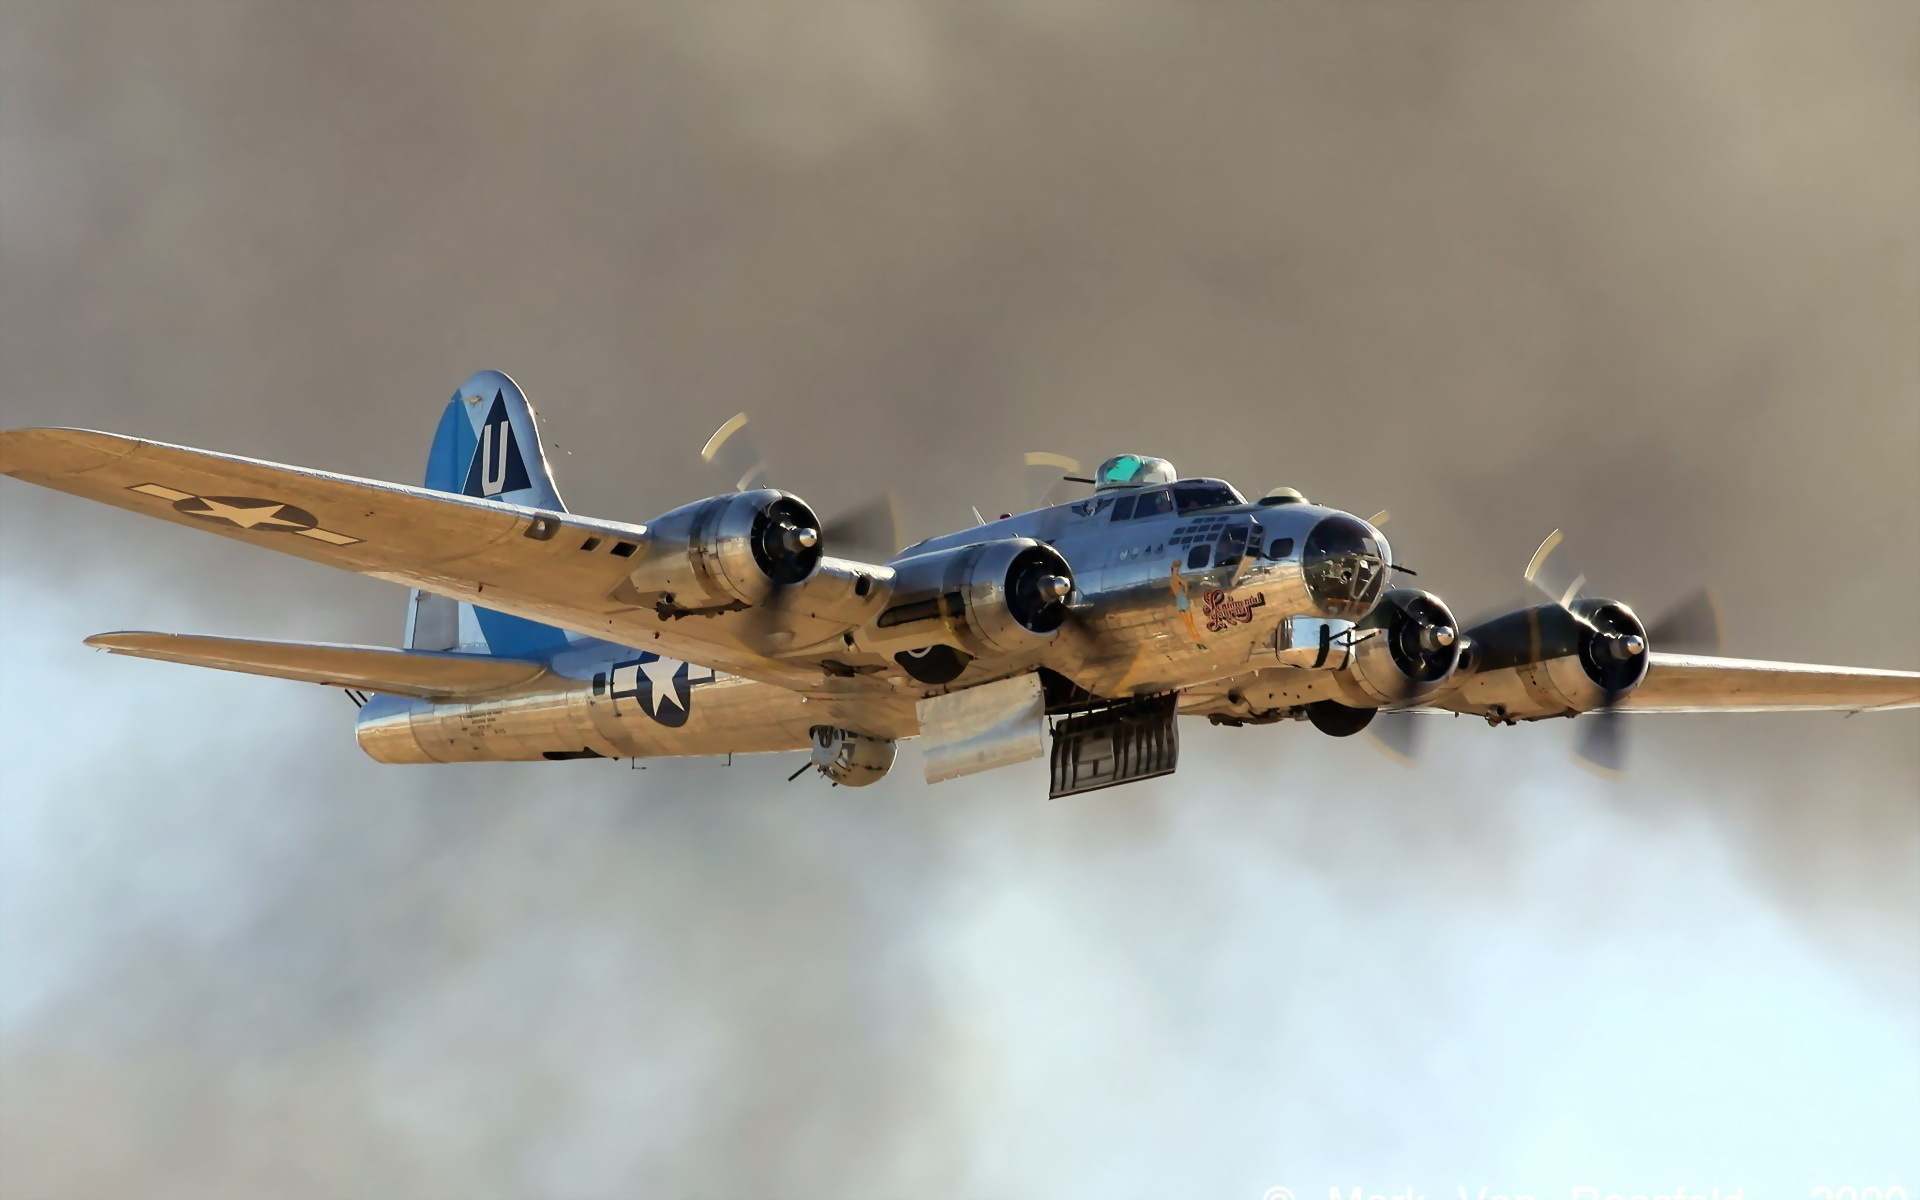 military, boeing b 17 flying fortress, air force, aircraft, airplane, bombers